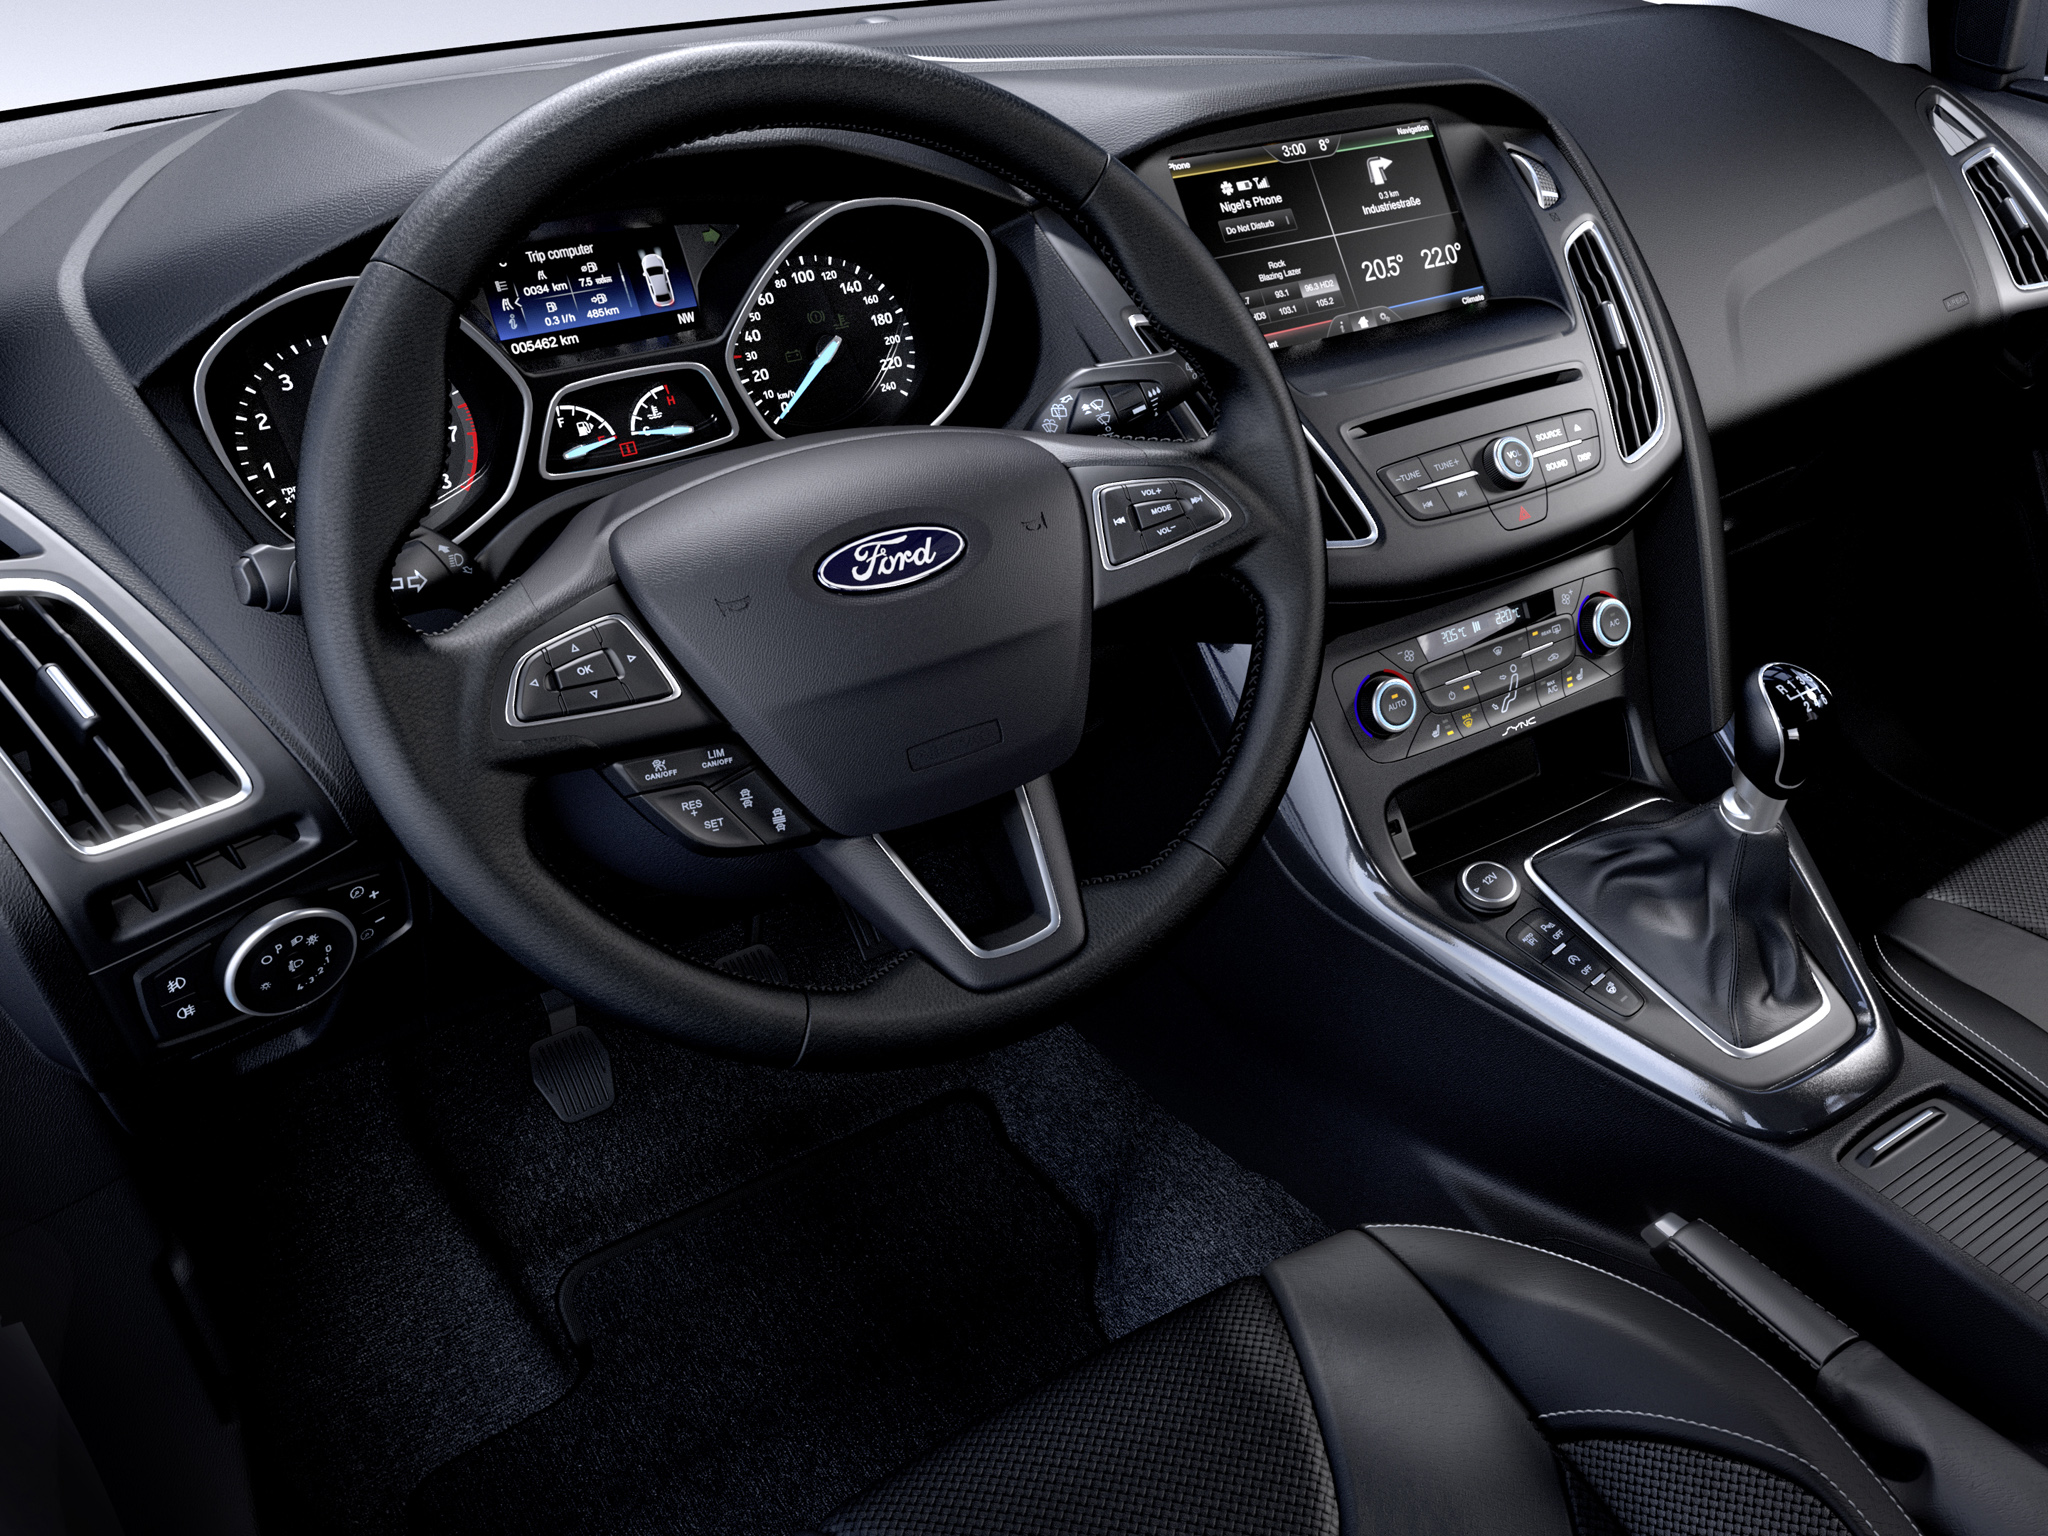 2014 Ford Focus Estate / Touring Leaked Photos Show New Interior and  Redesigned Grille - autoevolution